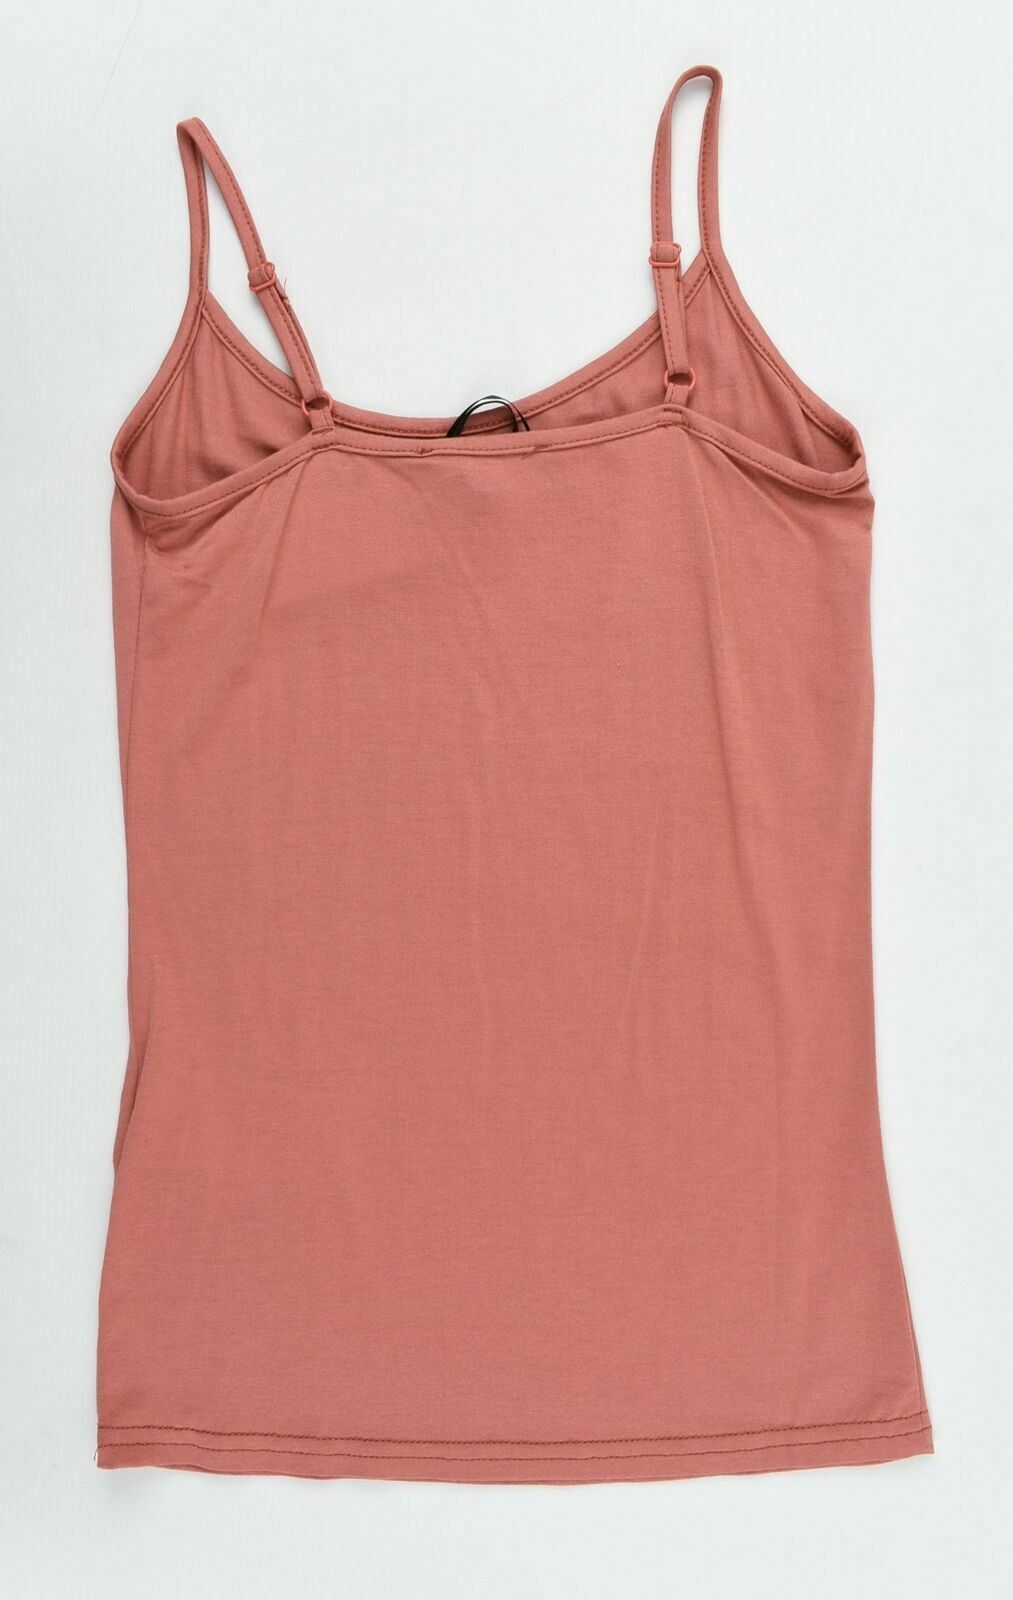 MORGAN Women's Red Strappy Vest Top- Size UK 6